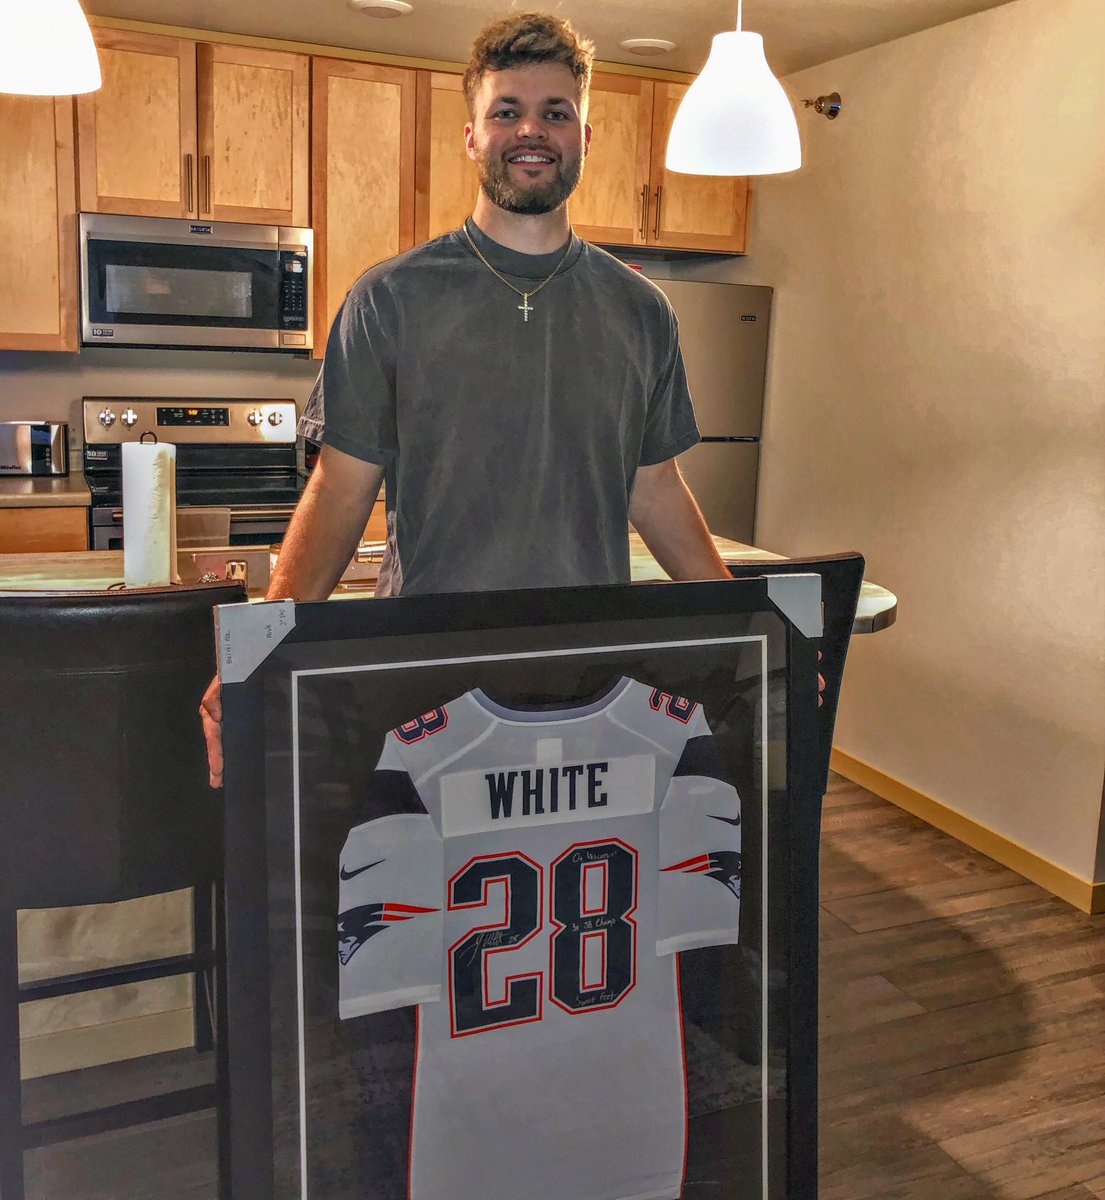 Shoutout to Super Bowl LEGEND, James White, for being my first NFL client! Appreciate you supporting me and my work, bro. @SweetFeet_White Might have to start a jersey collection👀 Enjoy Super Bowl Sunday, everybody🙏🏼